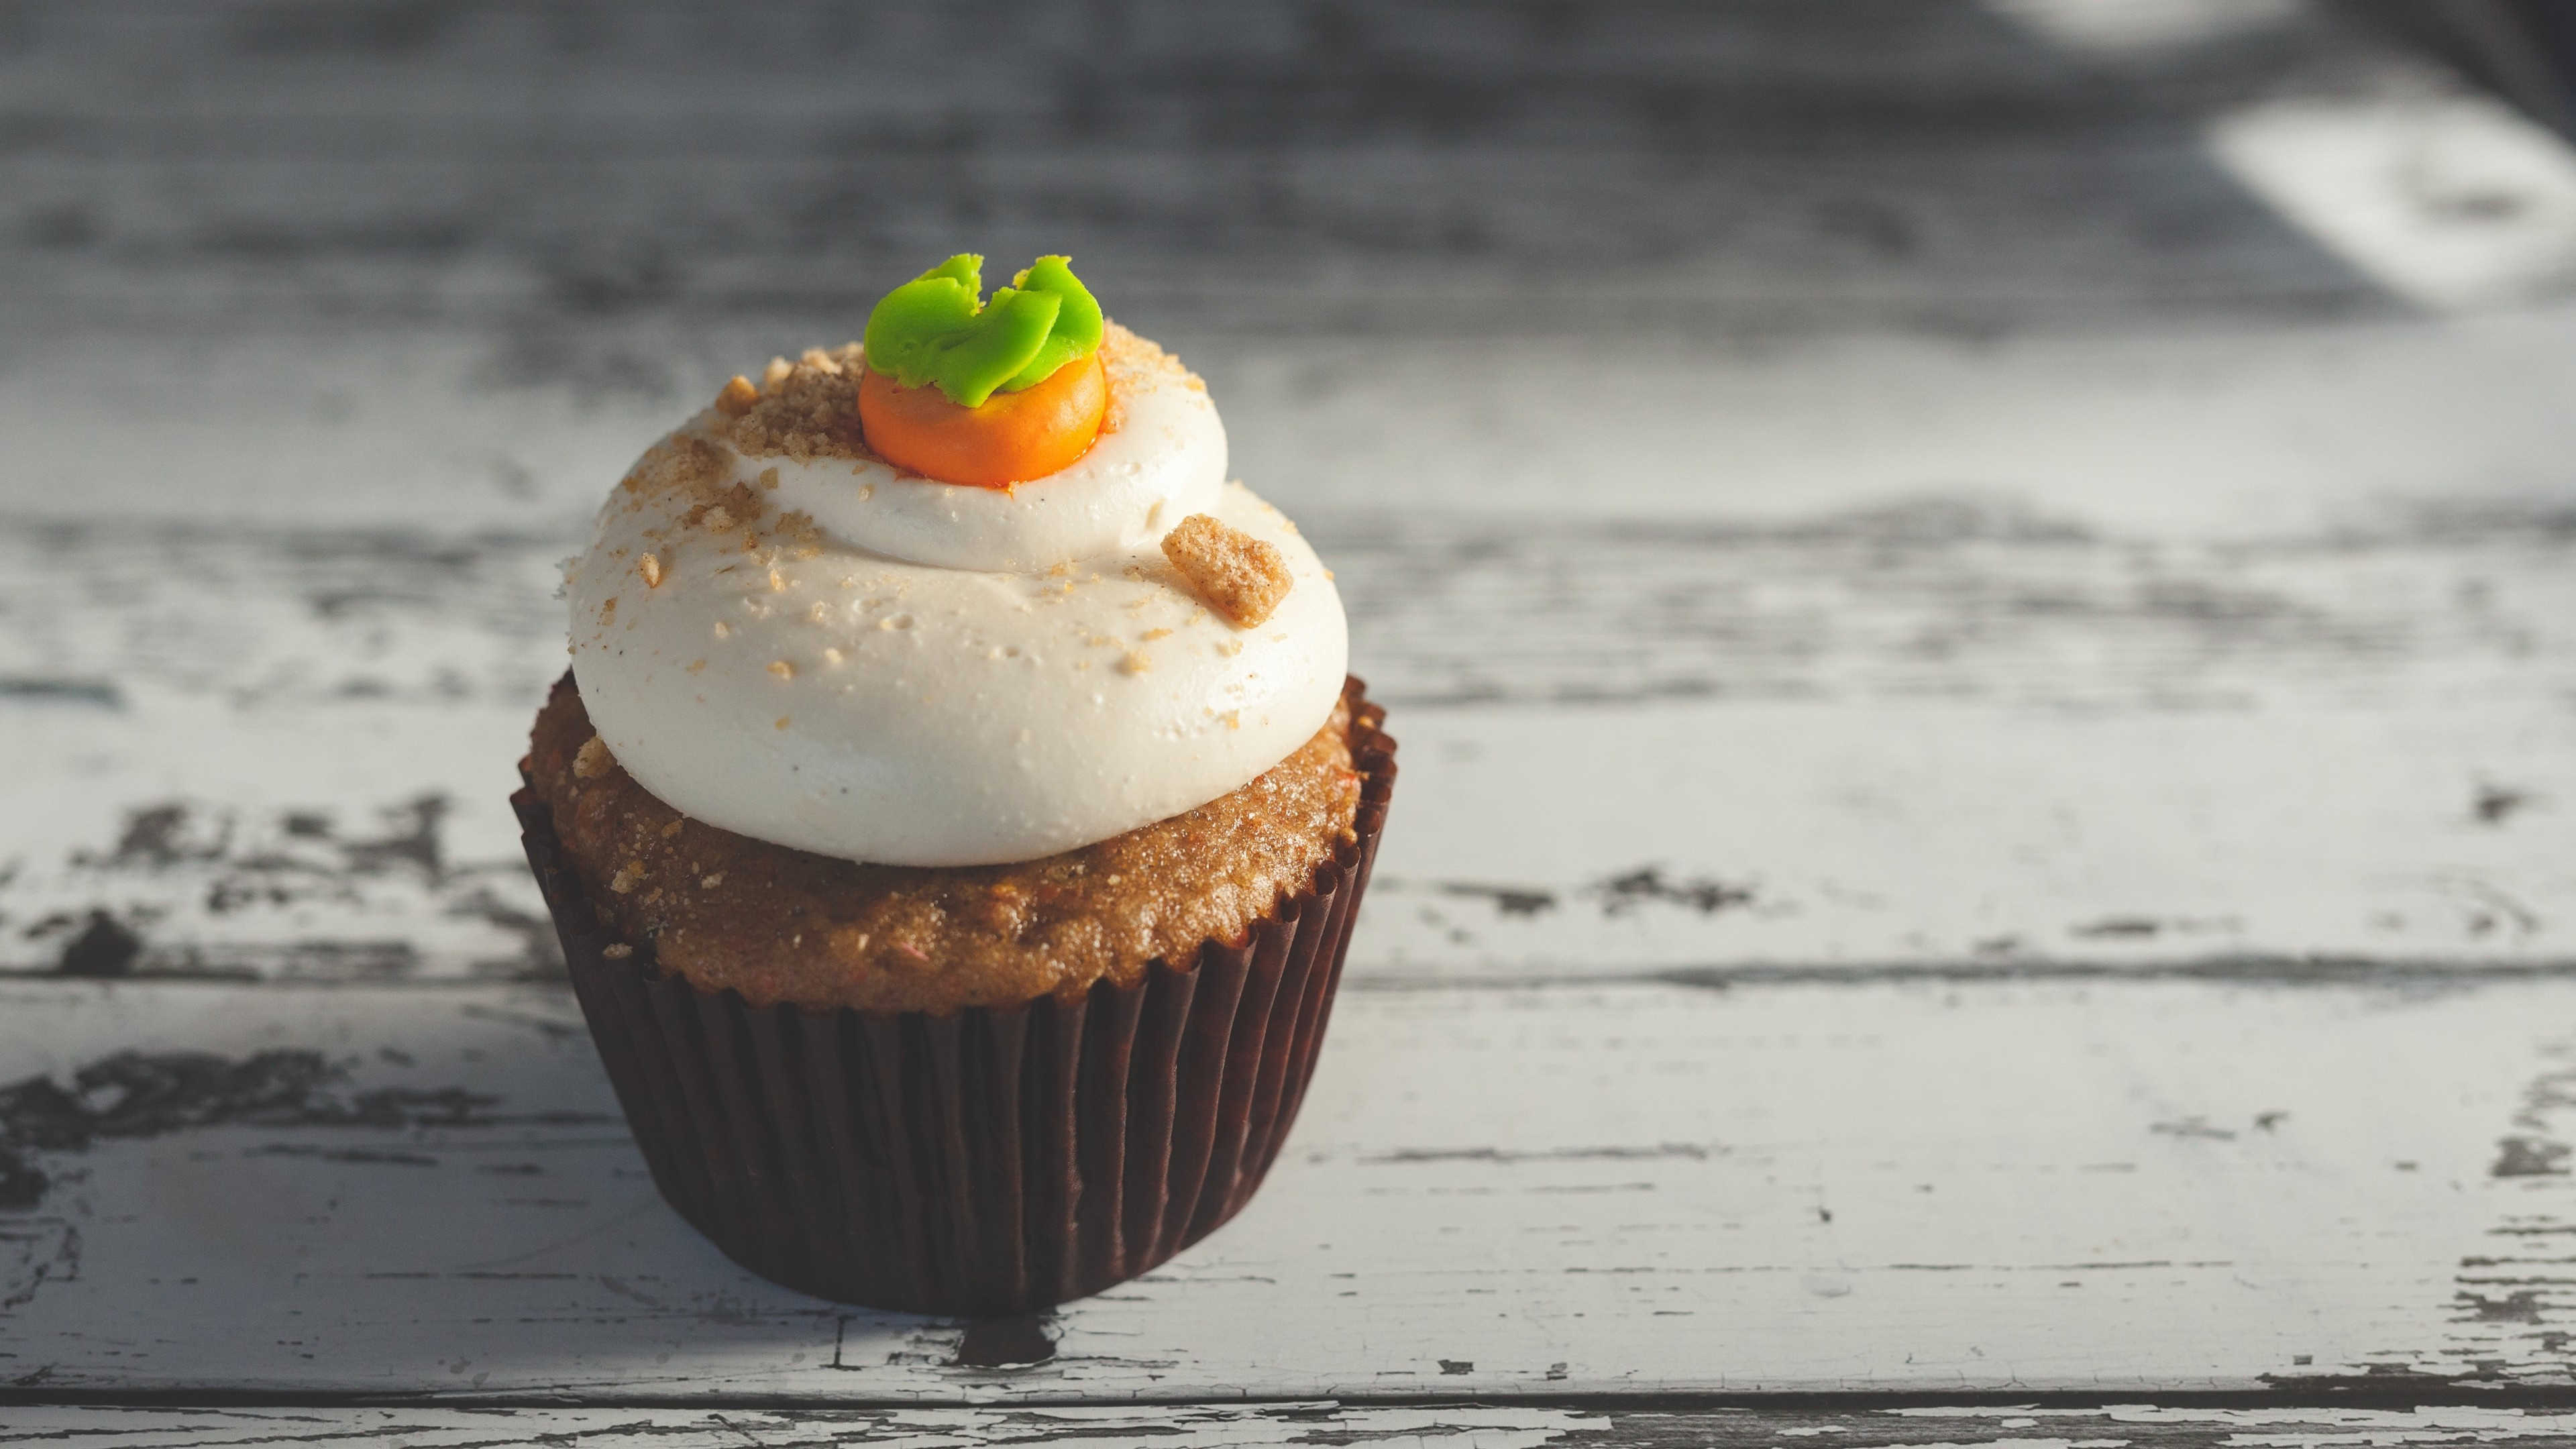 Delicious cupcakes, Cream muffin, UHD TV wallpapers, High-definition resolution, 3840x2160 4K Desktop